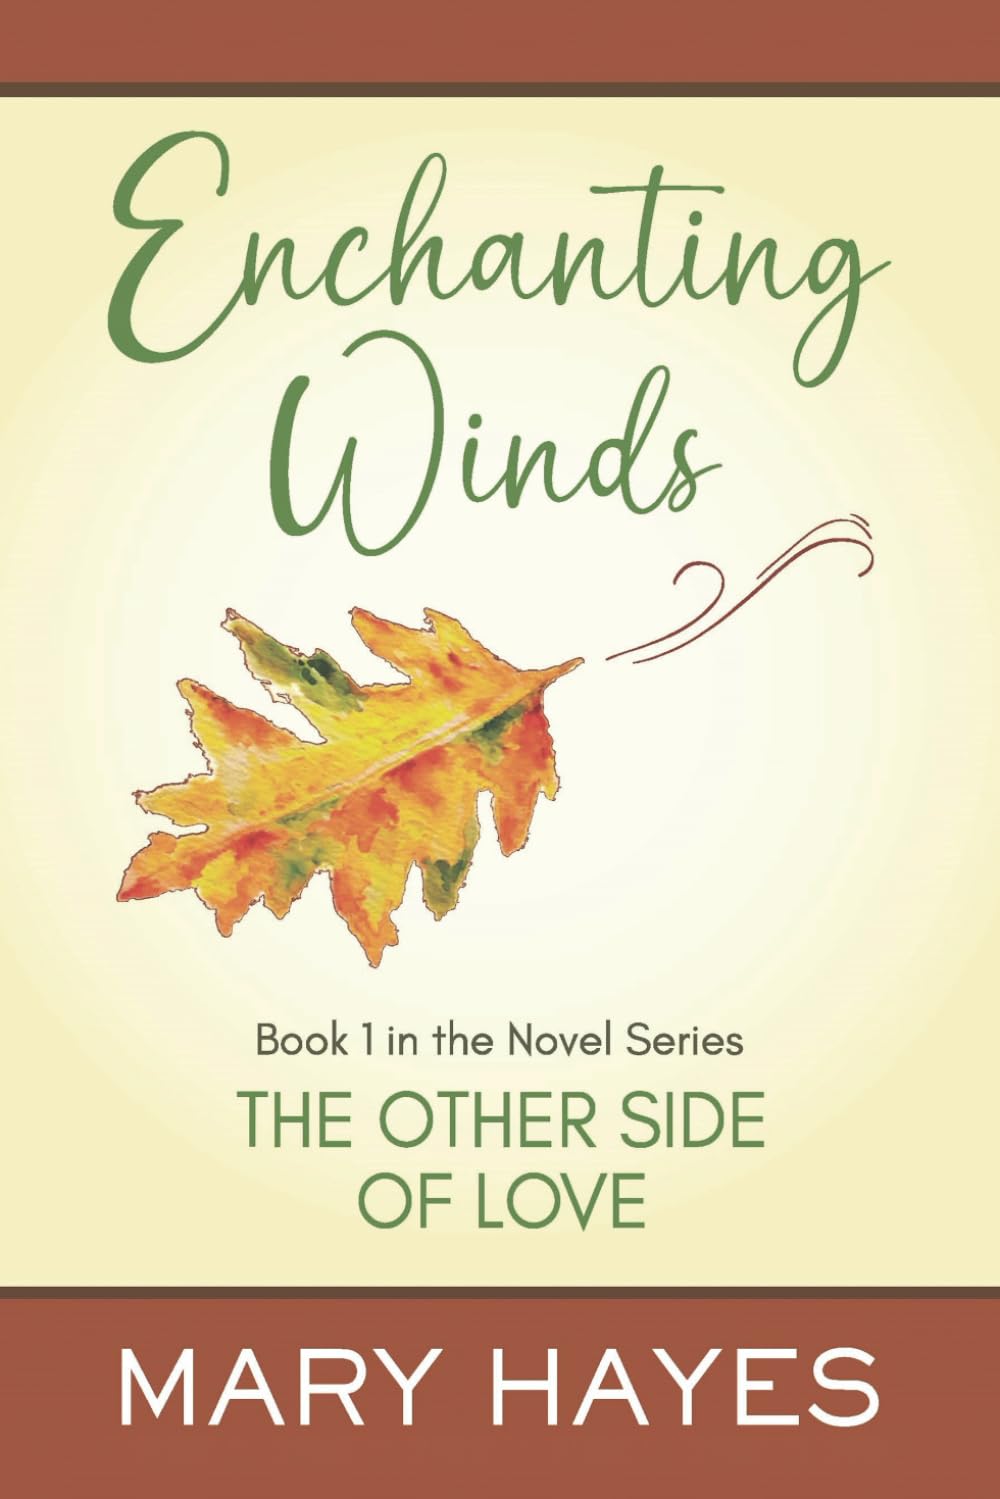 Enchanting Winds | Book 1 in the Other Side of Love Series - Spiral Circle